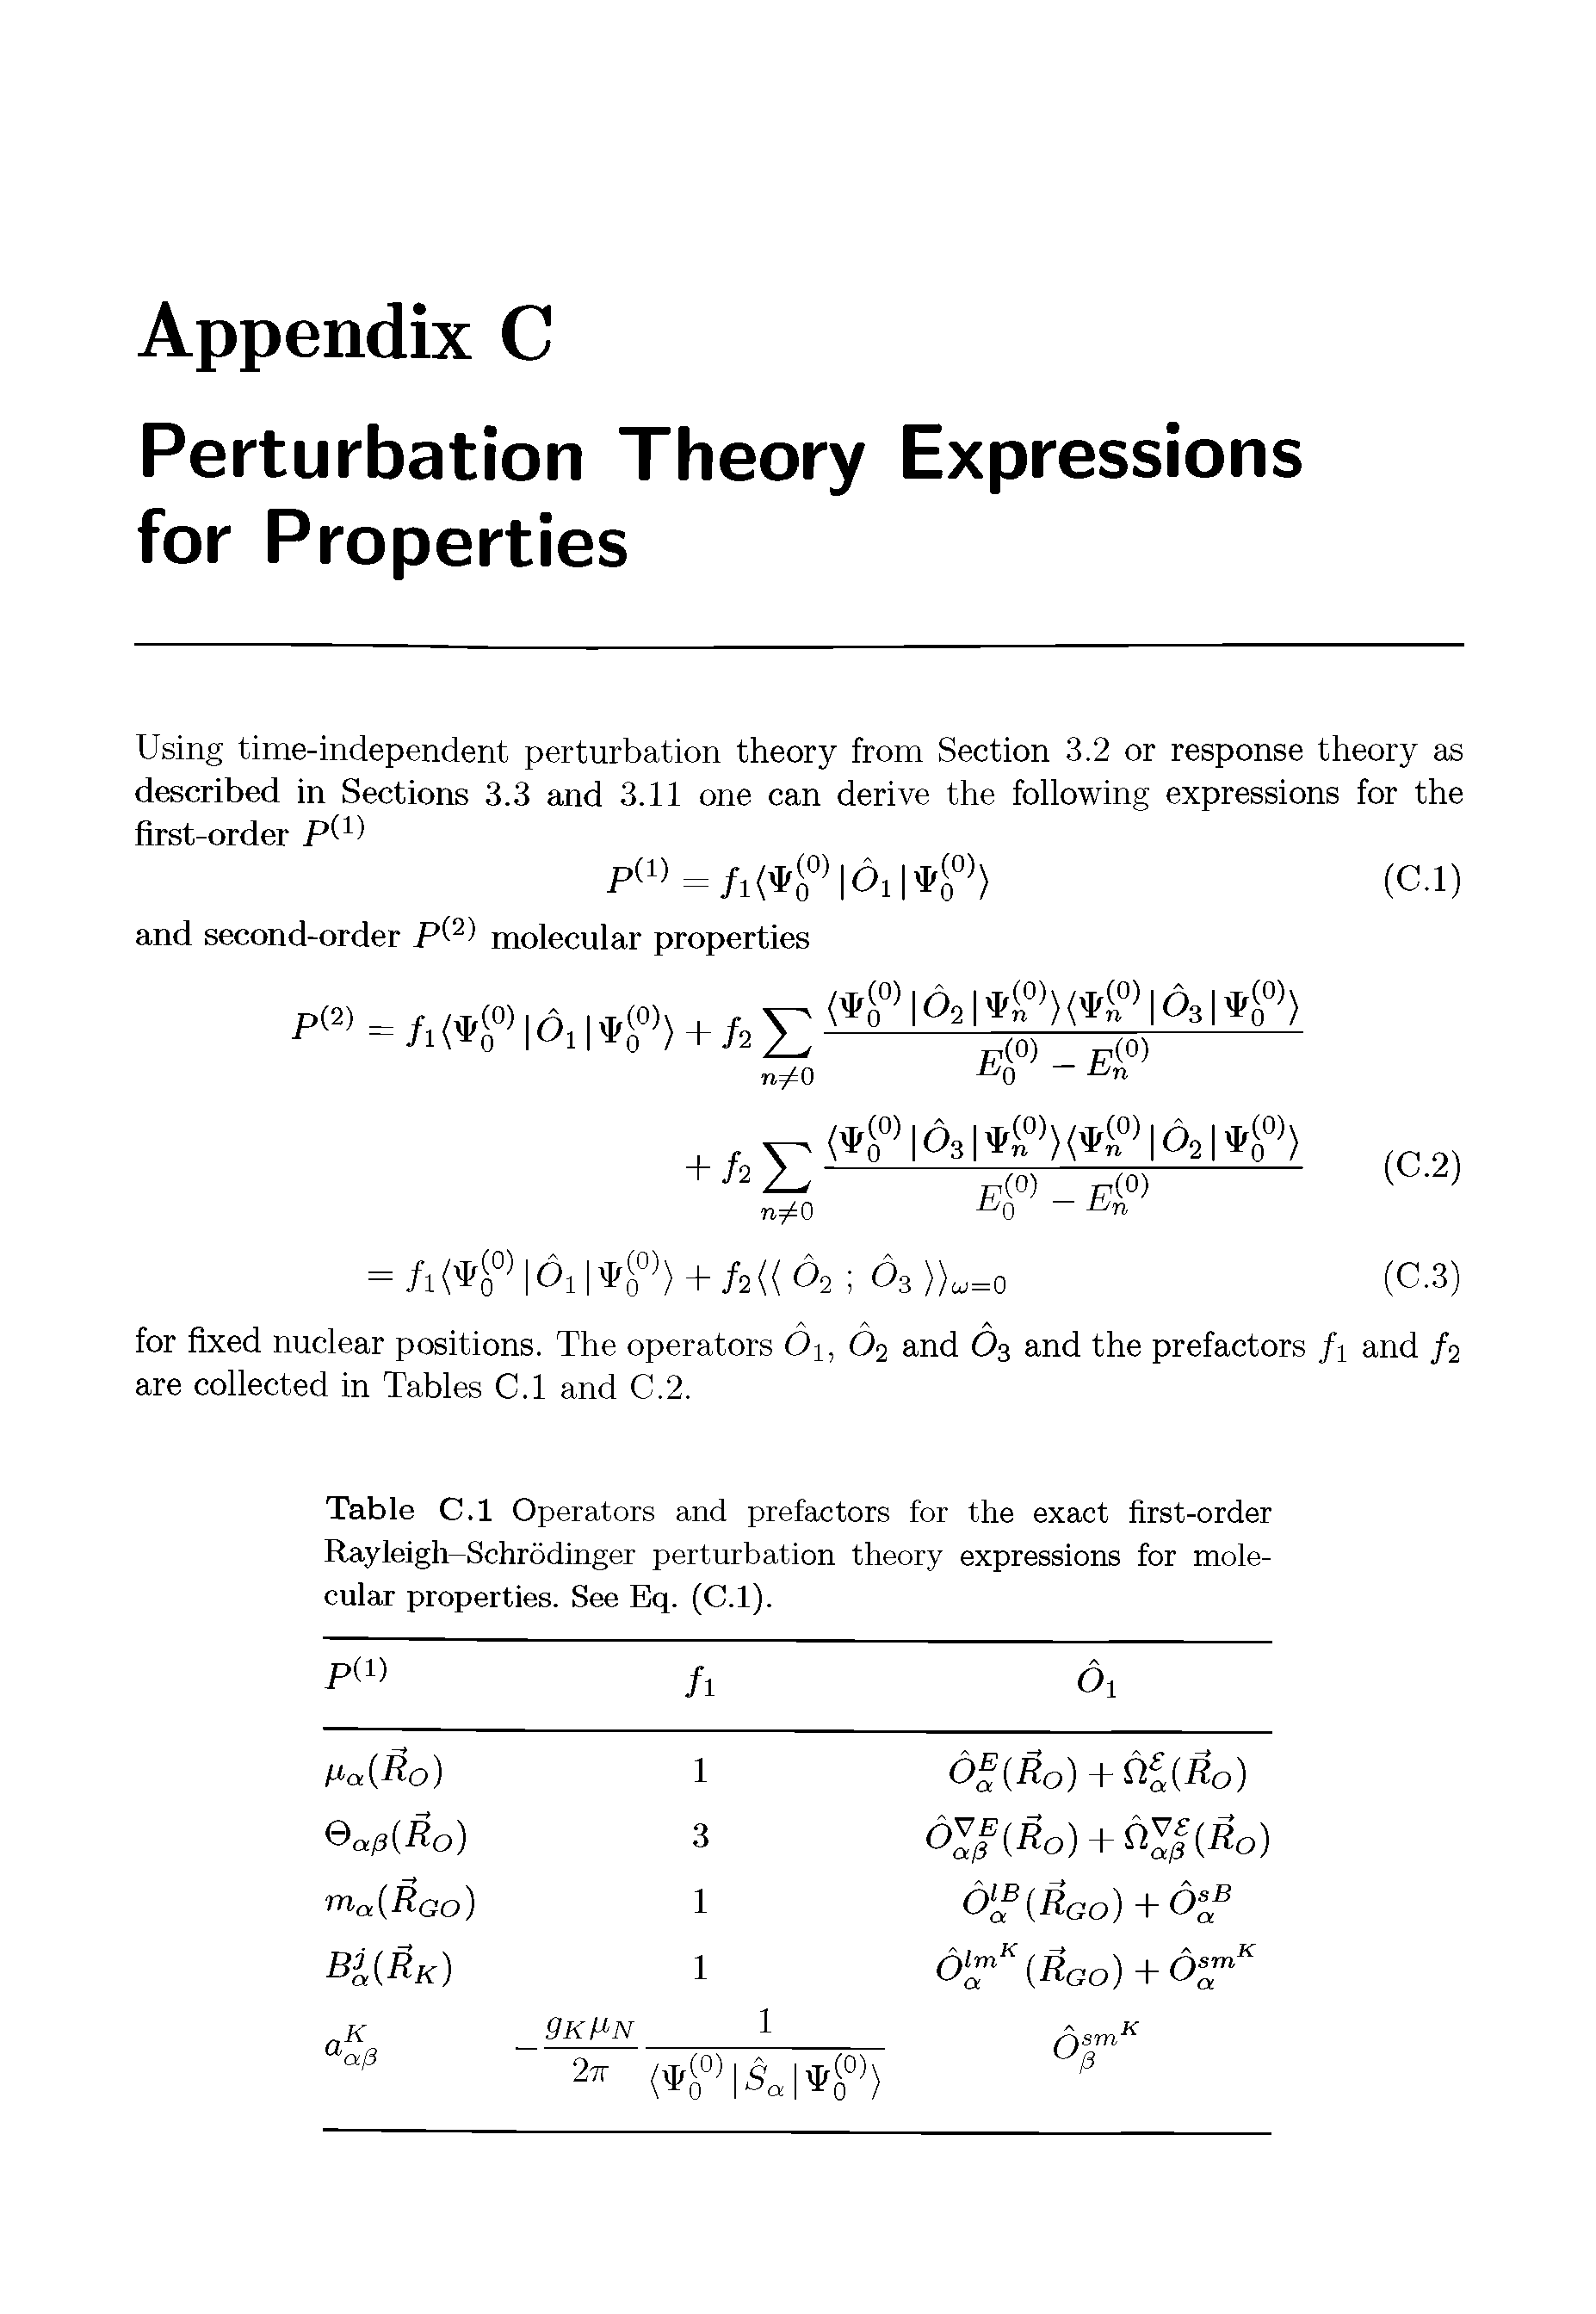 Table C.l Operators and prefactors for the exact first-order Rayleigh-Schrodinger perturbation theory expressions for molecular properties. See Ek[. (C.l).